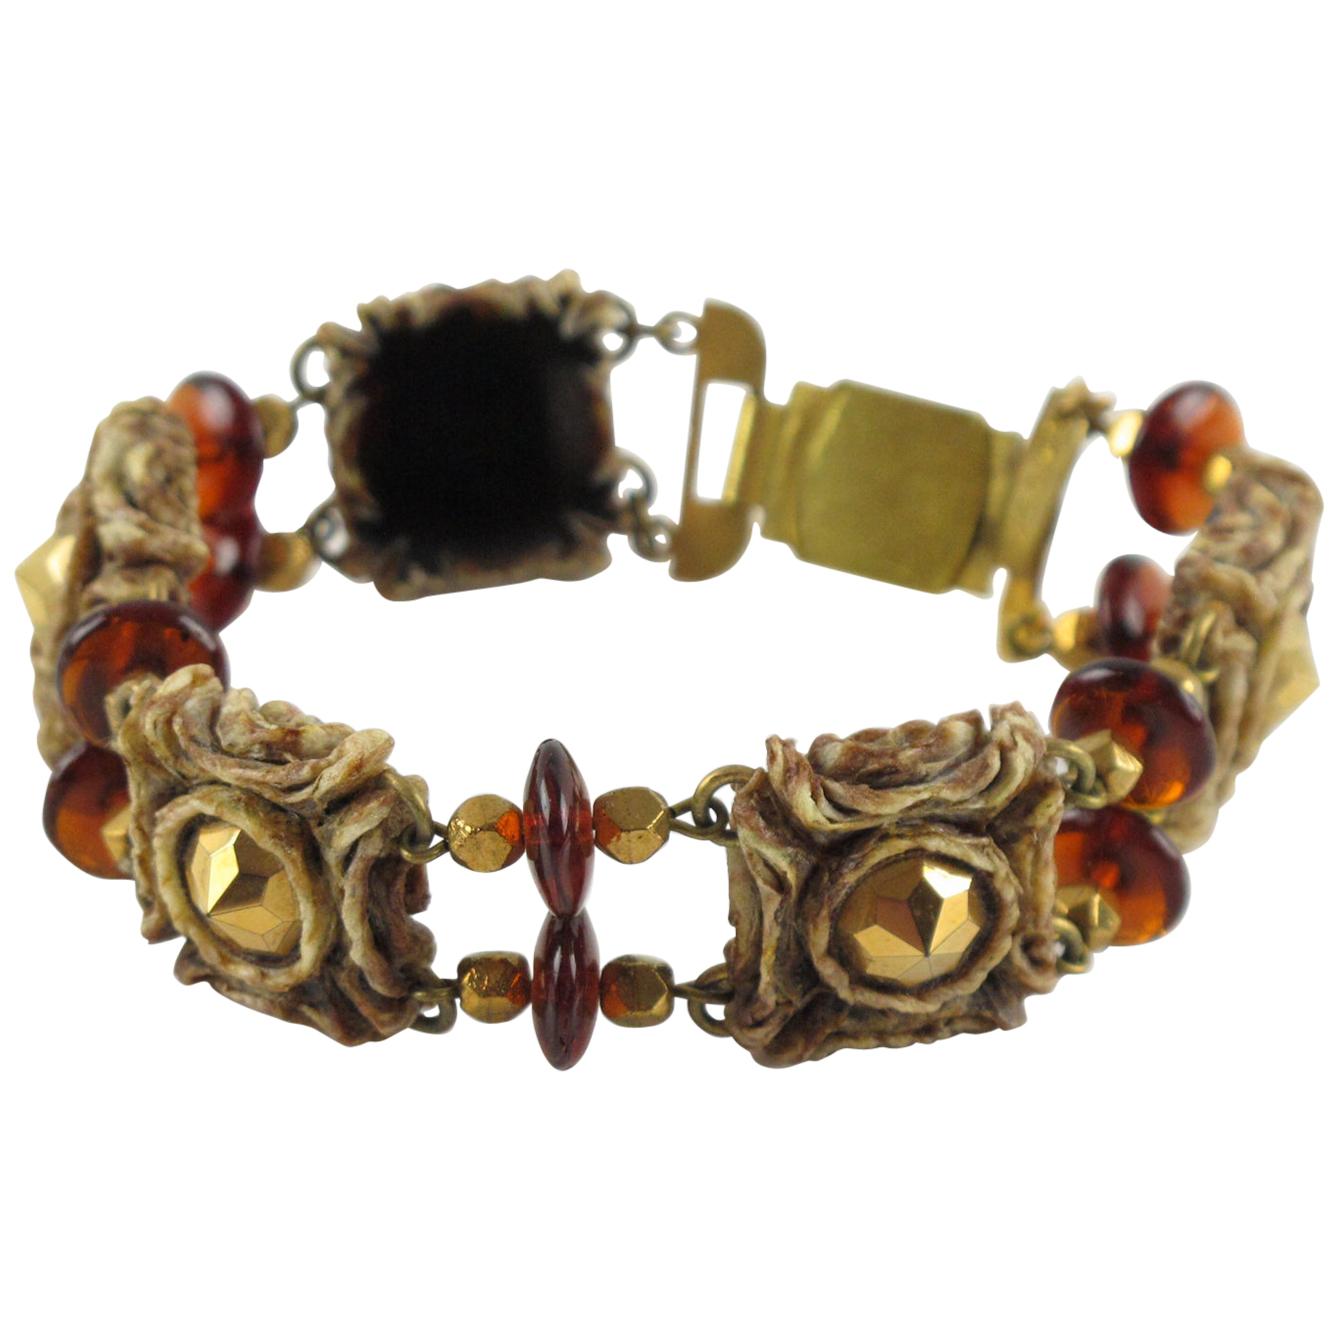 Henry Perichon, a French jewelry designer, created this stunning resin link bracelet adorned with amber-colored glass beads and metallic stones. He revolutionized the plastic jewelry industry with his 